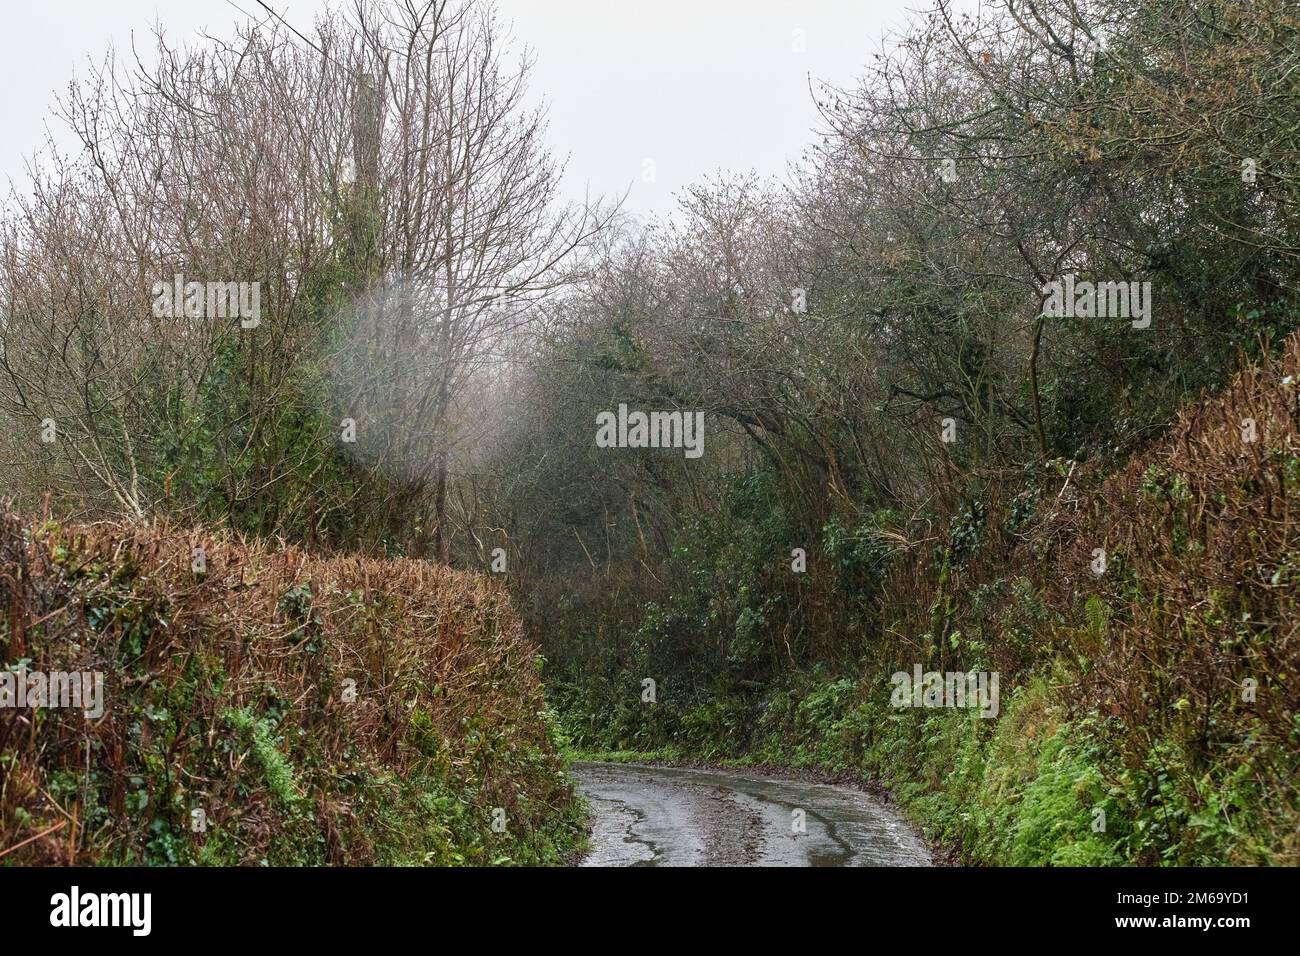 Farlacombe Devon, United Kingdom. 03 Jan 2023, High winds and heavy rain cause flooding and potholes on rural roads in Devon. Credit: Will Tudor/Alamy Live News Stock Photo